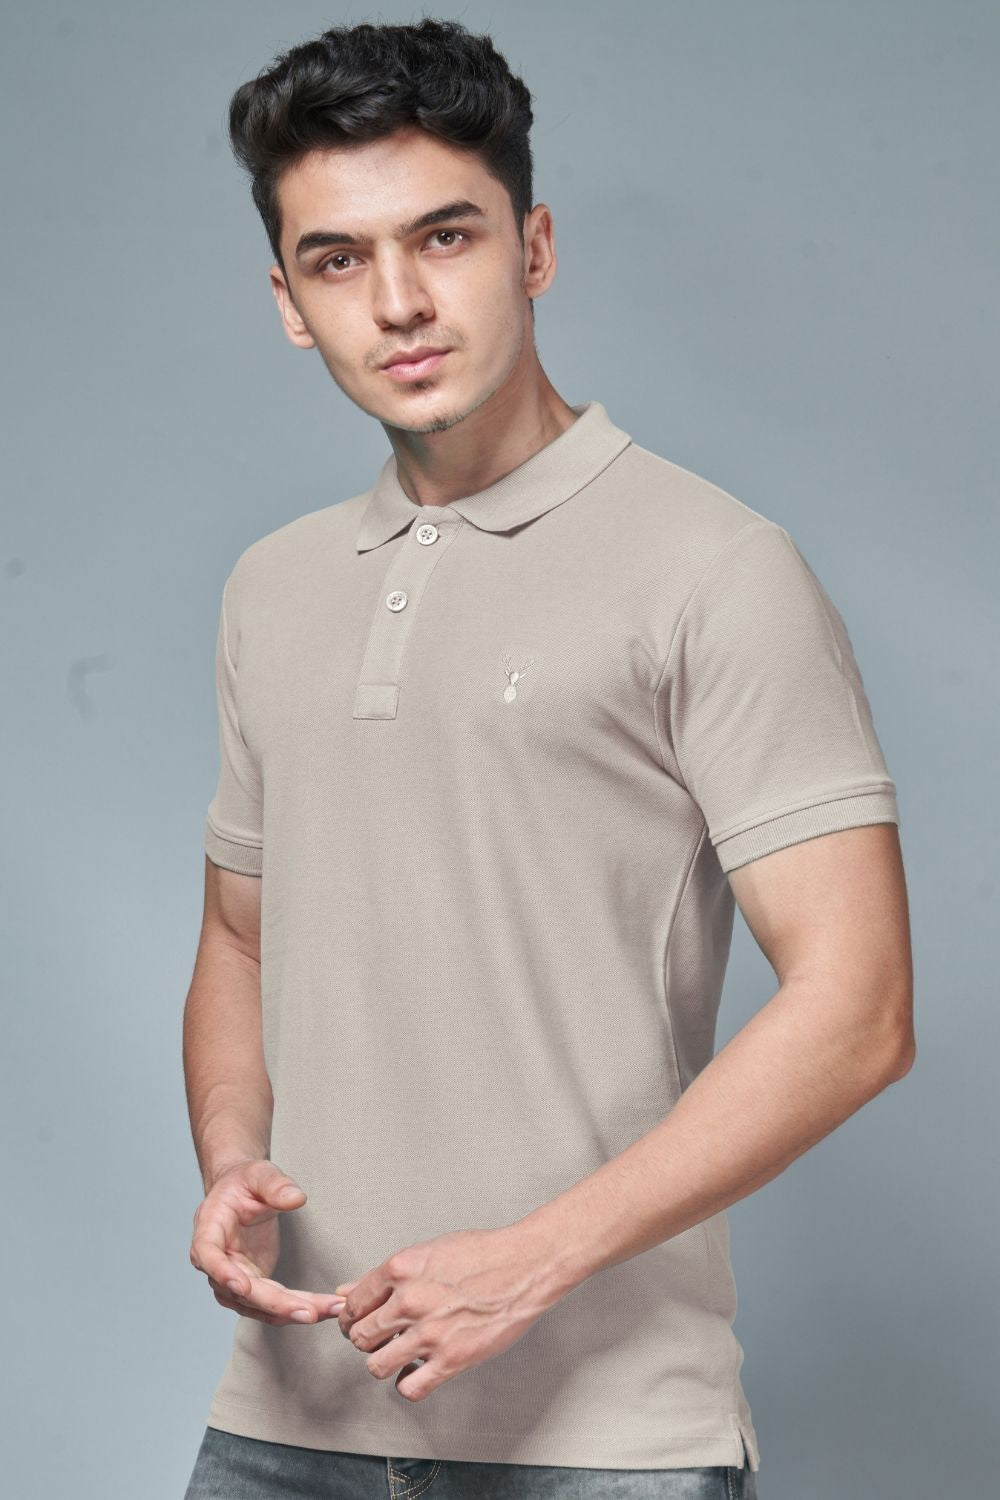 A model wearing Moon light colored, identity Polo T-shirts for men with collar and half sleeves.